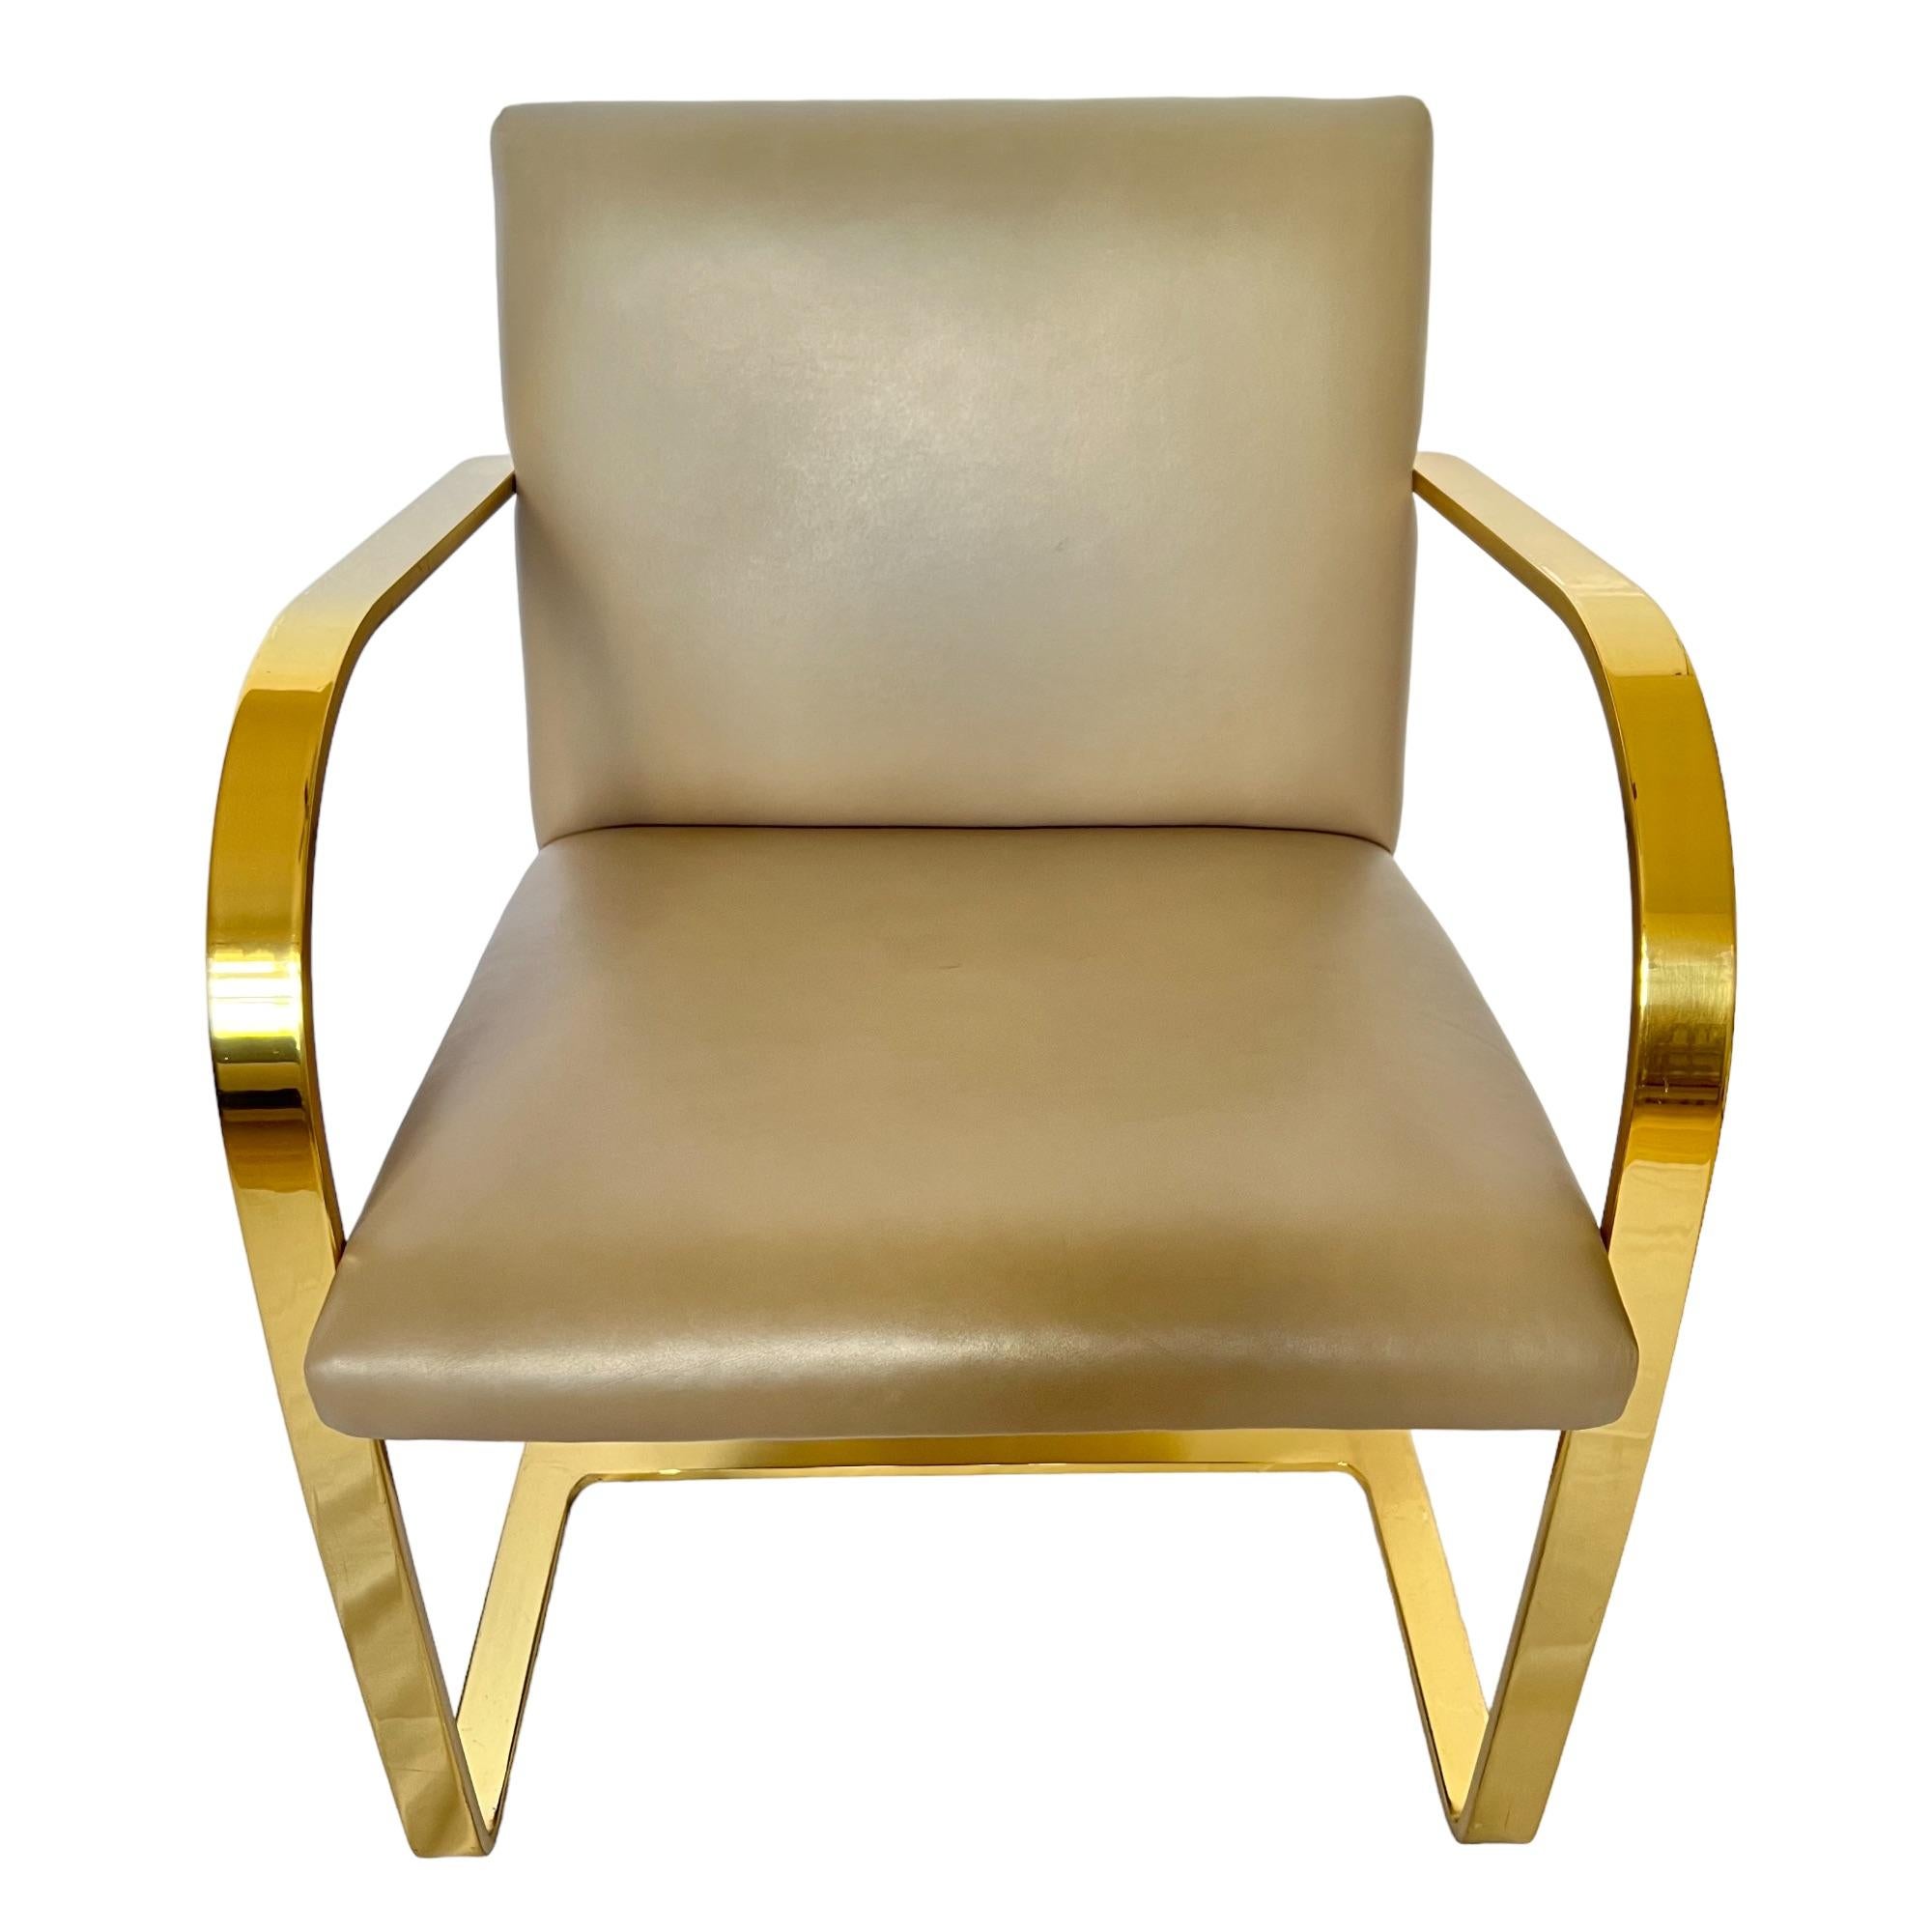 Late 20th Century Mies Van Der Rohe Brno Gold Brass Flat Bar Leather Chairs, a Pair For Sale